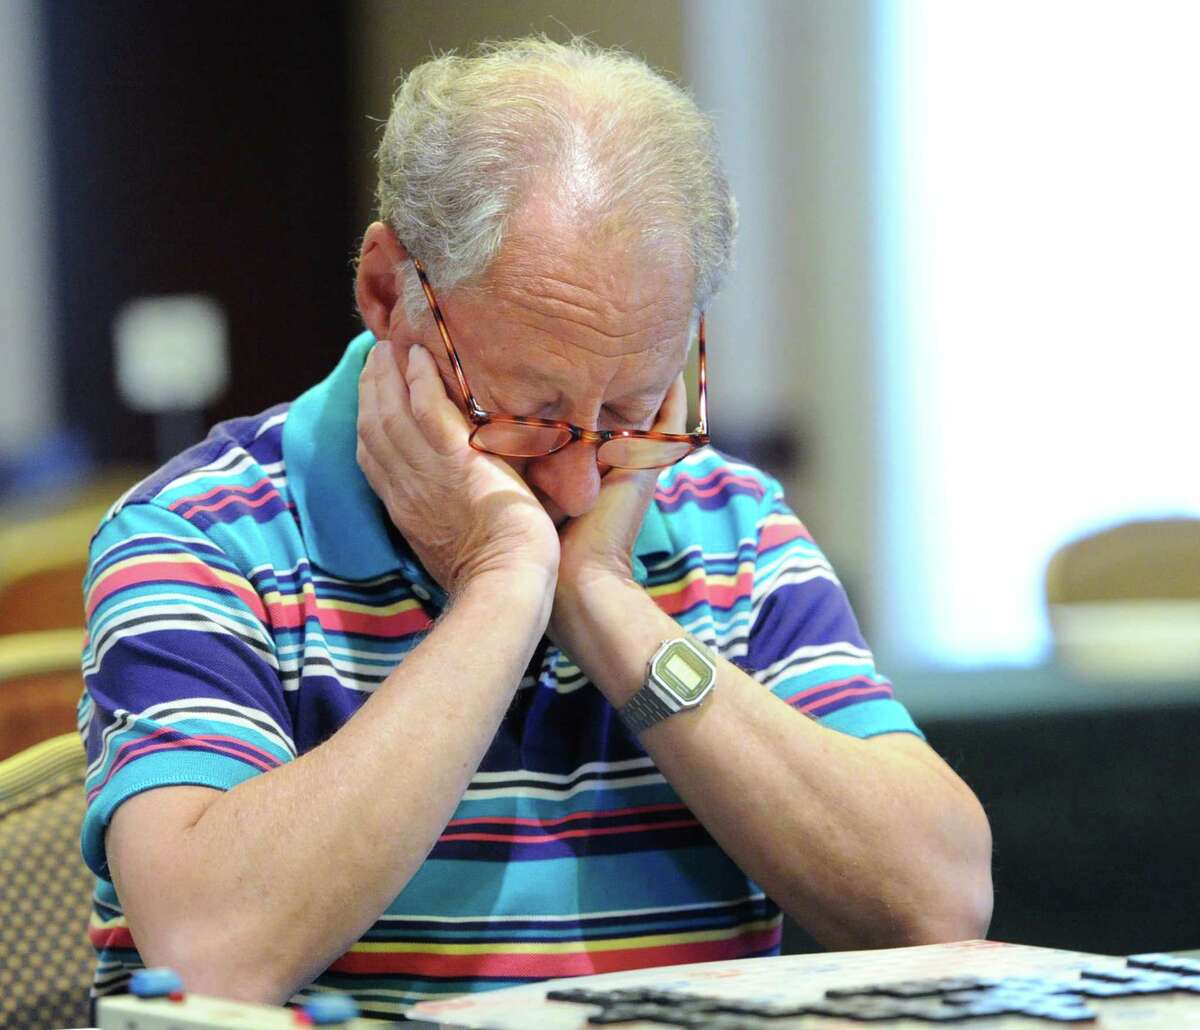 Jack Eichenbaum of Flushing, Queens, New York City, with eyes pointed straight down, looks as if he is sleeping but instead he is studying the board while playing a Scrabble match during the third annual Old Greenwich Scrabble Tournament at the Hyatt Regency Greenwich, Friday, August 16, 2013.